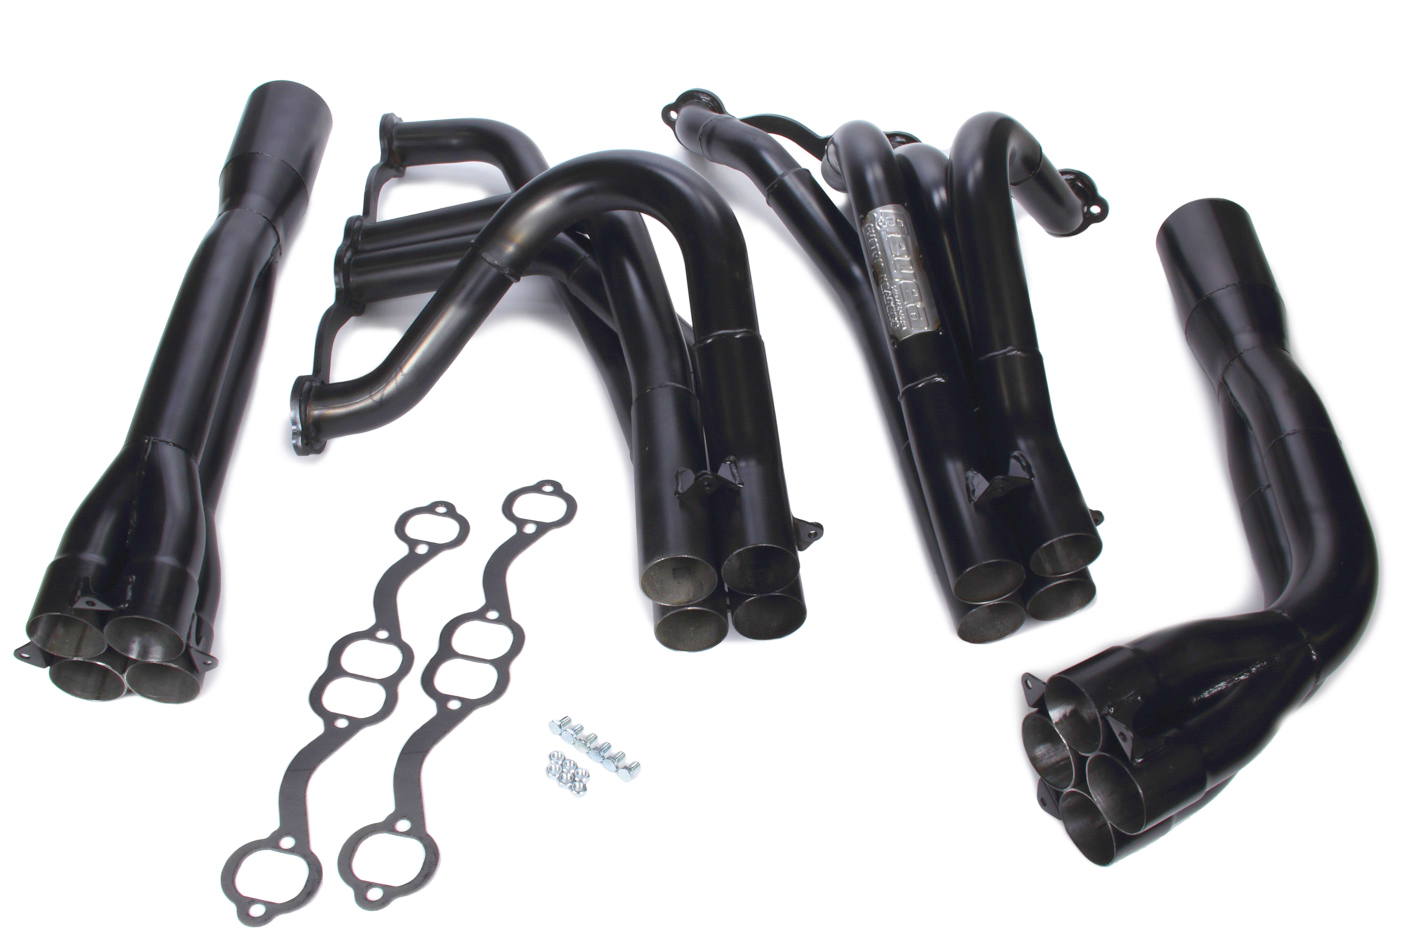 Beyea Headers DLMTY-23T2 Headers, Dirt Late Model, Tri-Y, 1-3/4 to 1-7/8 to 2 in Primary, 3-1/2 in Collector, Steel, Black Paint, 23 Degree Head, Small Block Chevy, Kit